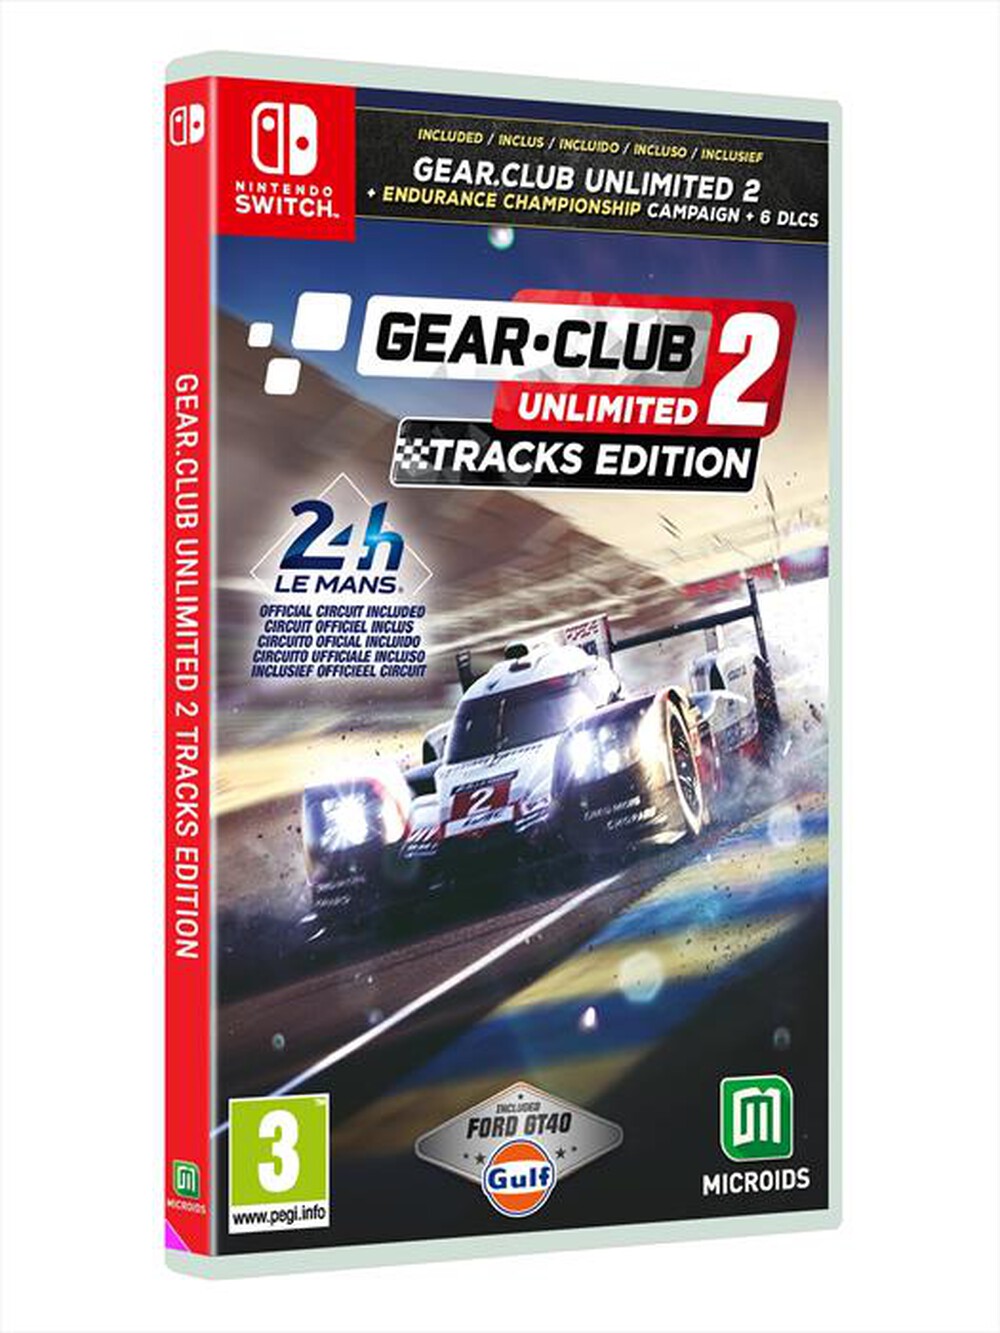 "MICROIDS - GEAR.CLUB UNLIMITED 2 TRACKS EDITION SWT"